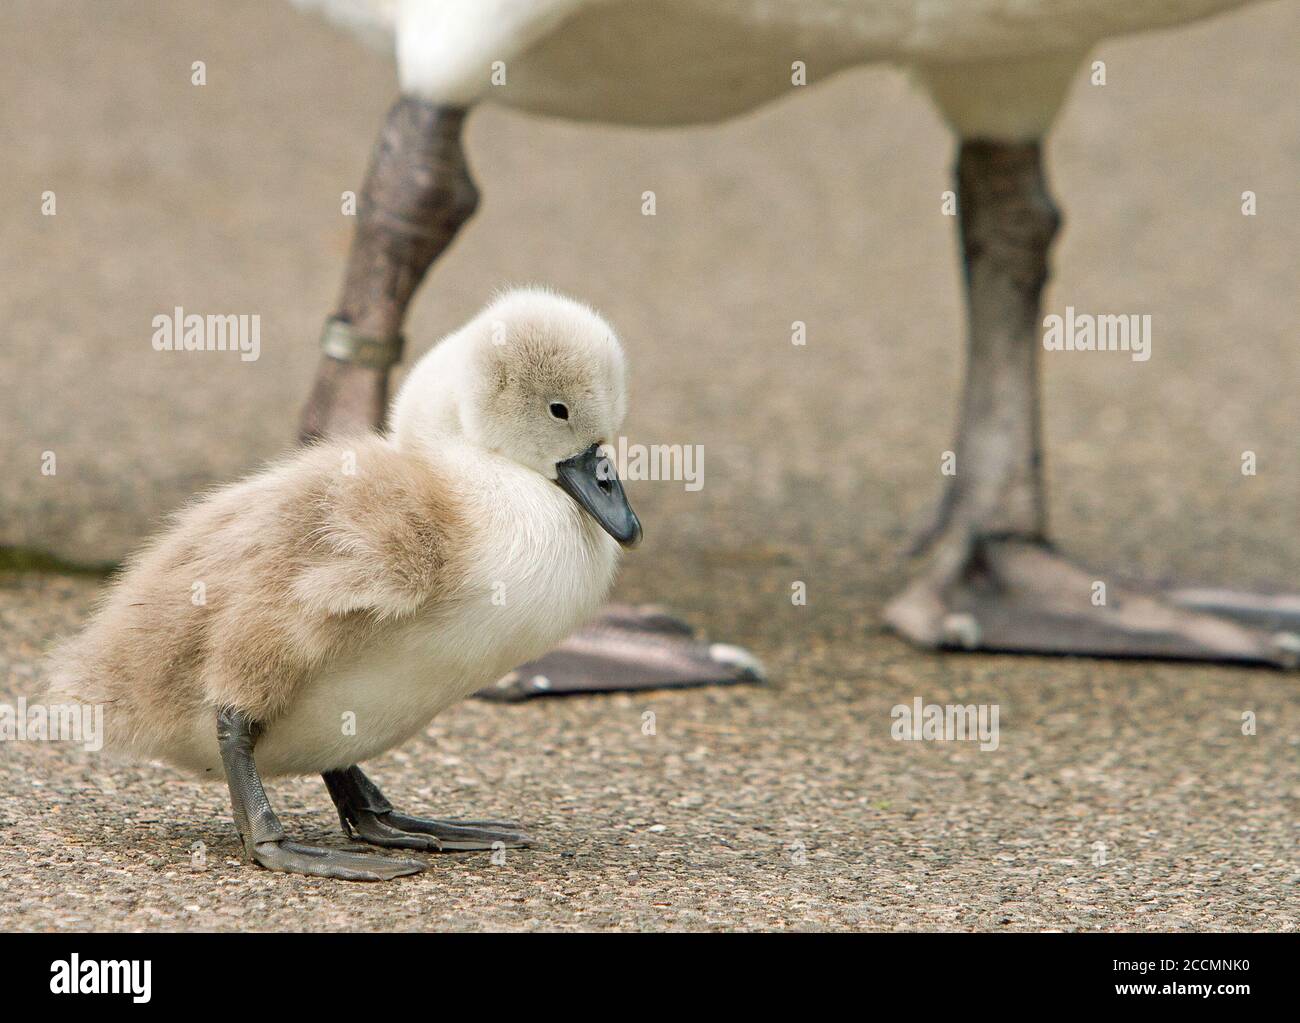 A cute small fluffy Cygnet (baby swan) standing on the gravel ground with adult Swan in the background Stock Photo